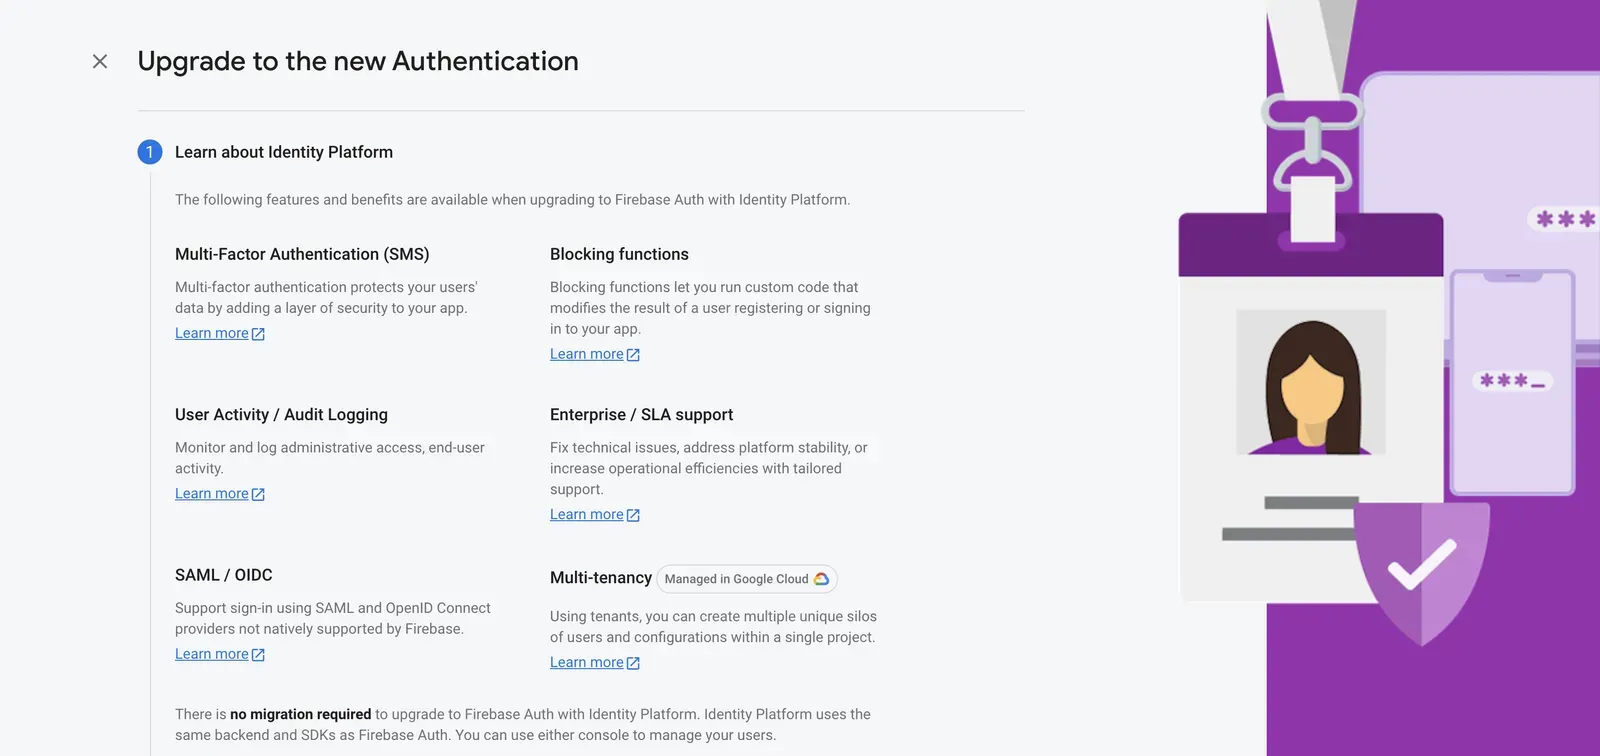 A screenshot of the new features of Firebase Authentication